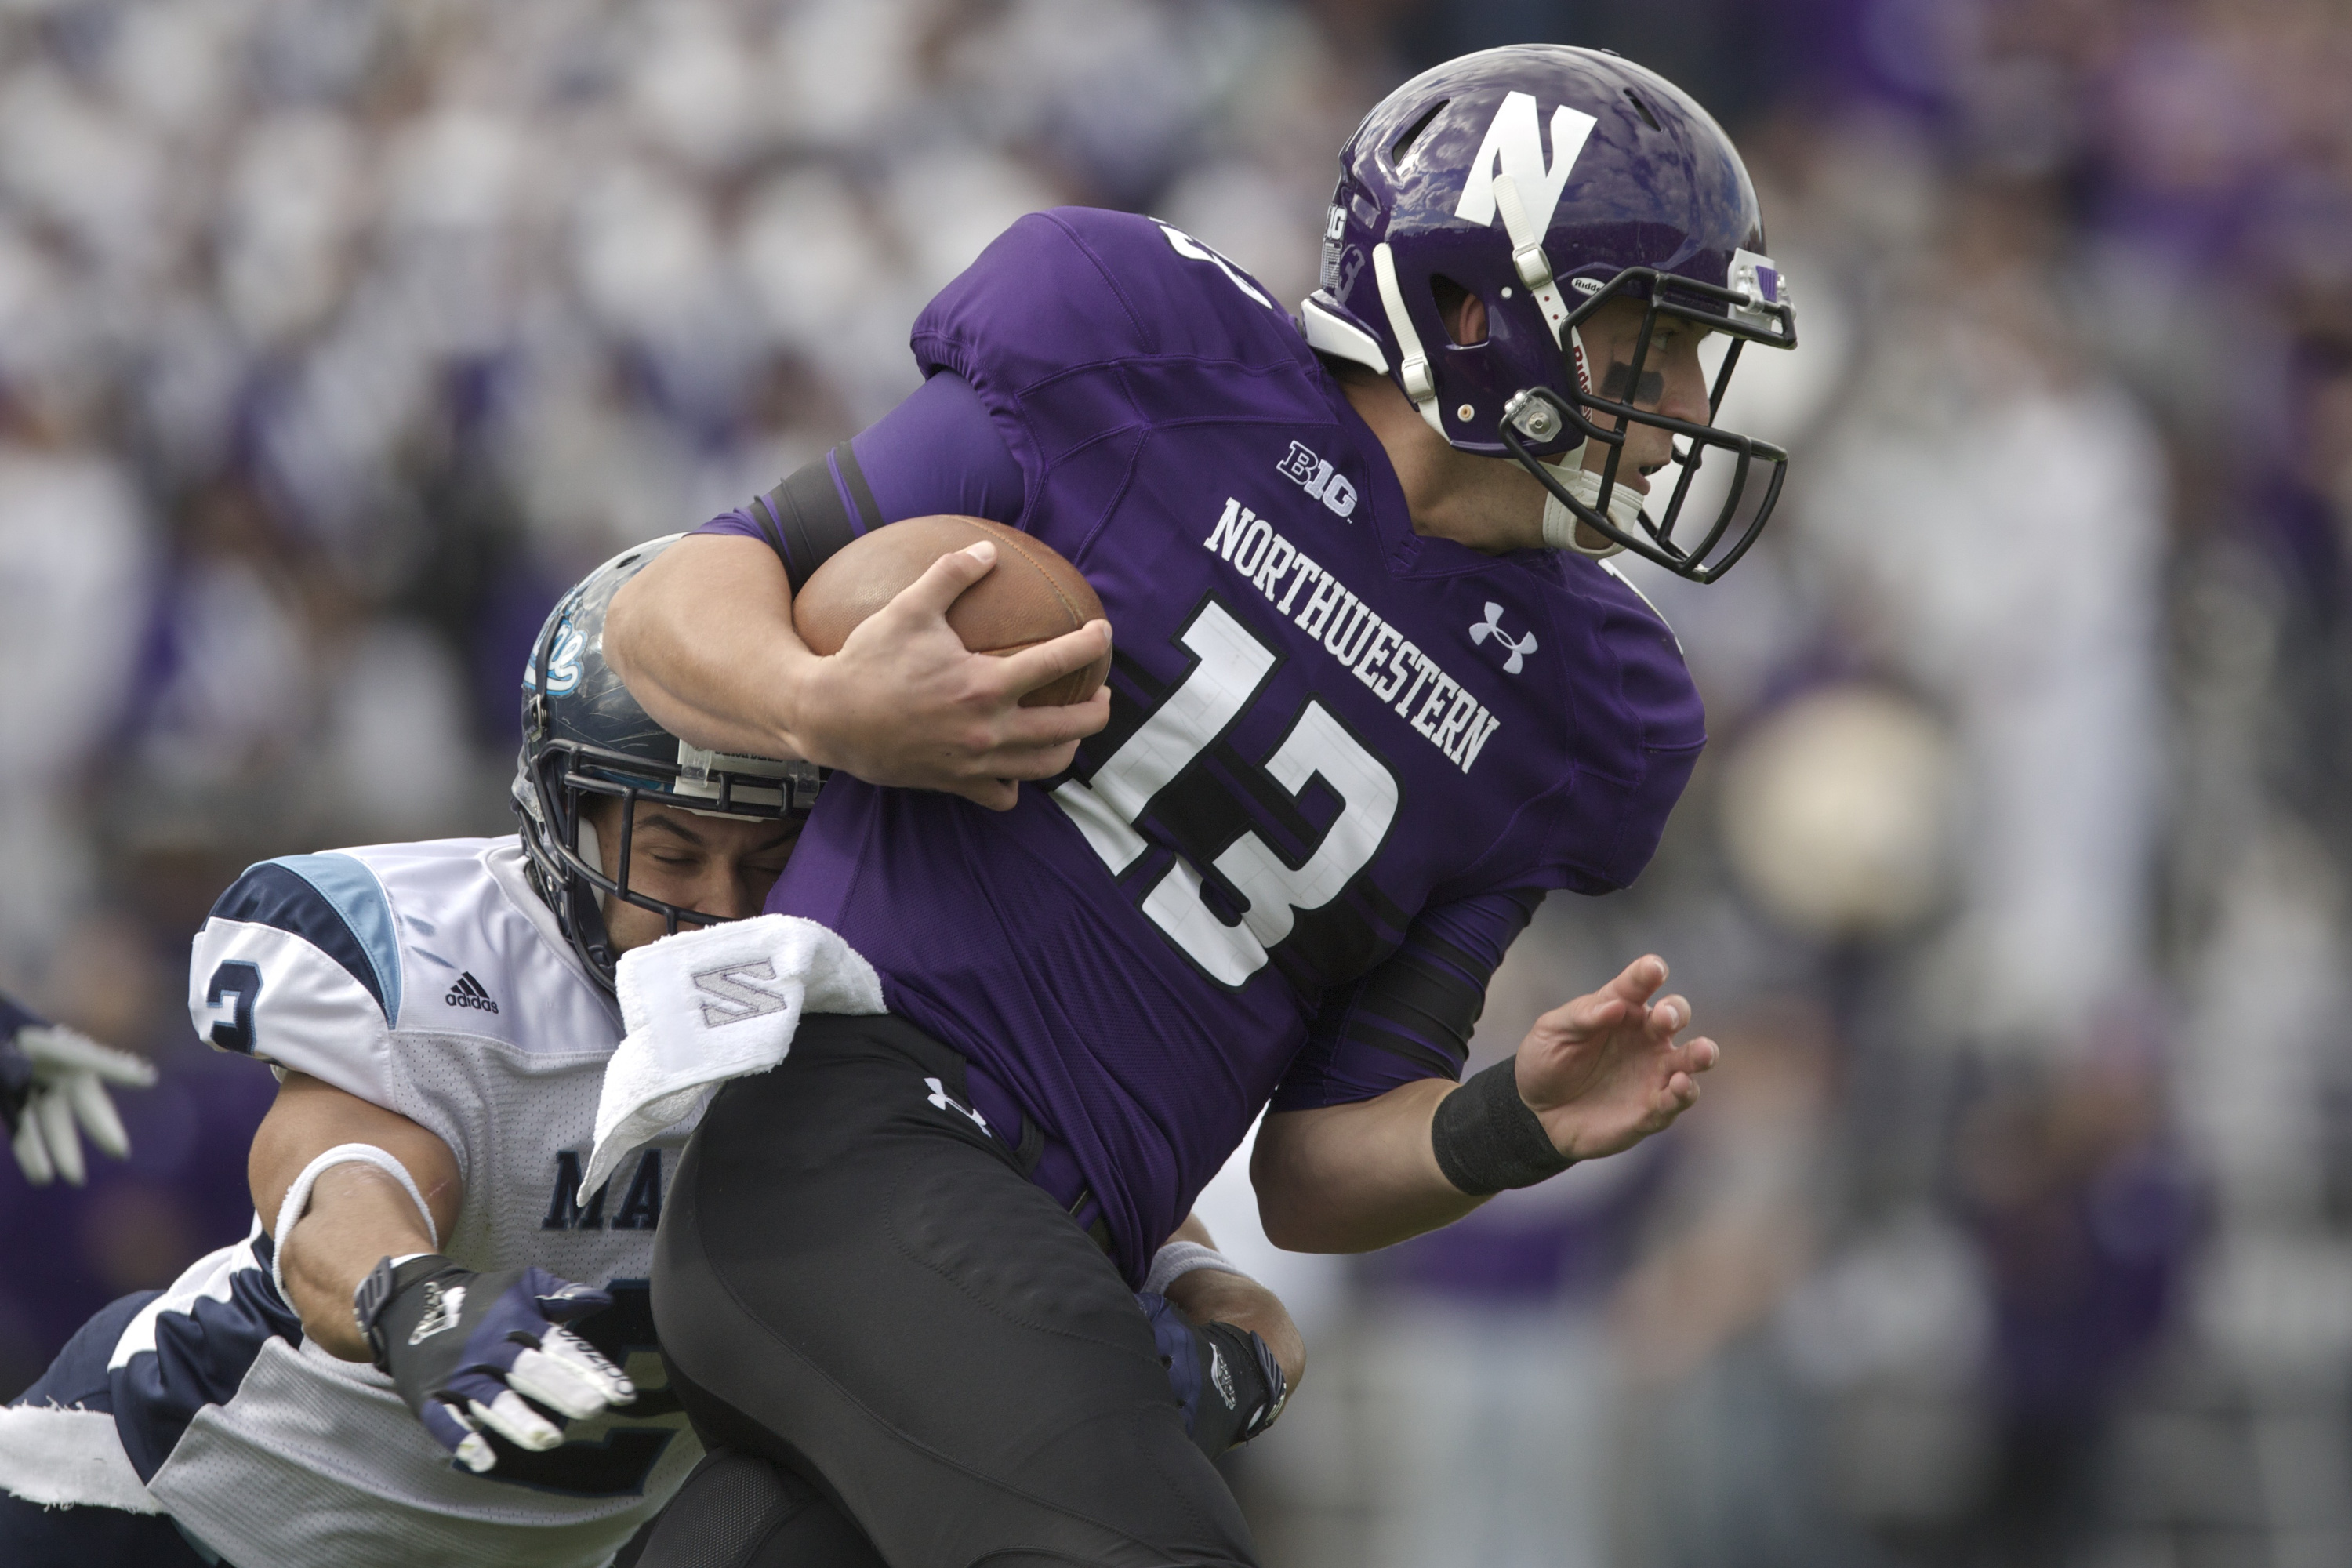 Cabrinni Goncalvesof the Maine Black Bears tackles Trevor Siemianof the Northwestern Wildcats during their college football game at Ryan Field on September 21, 2013 in Evanston, Illinois.